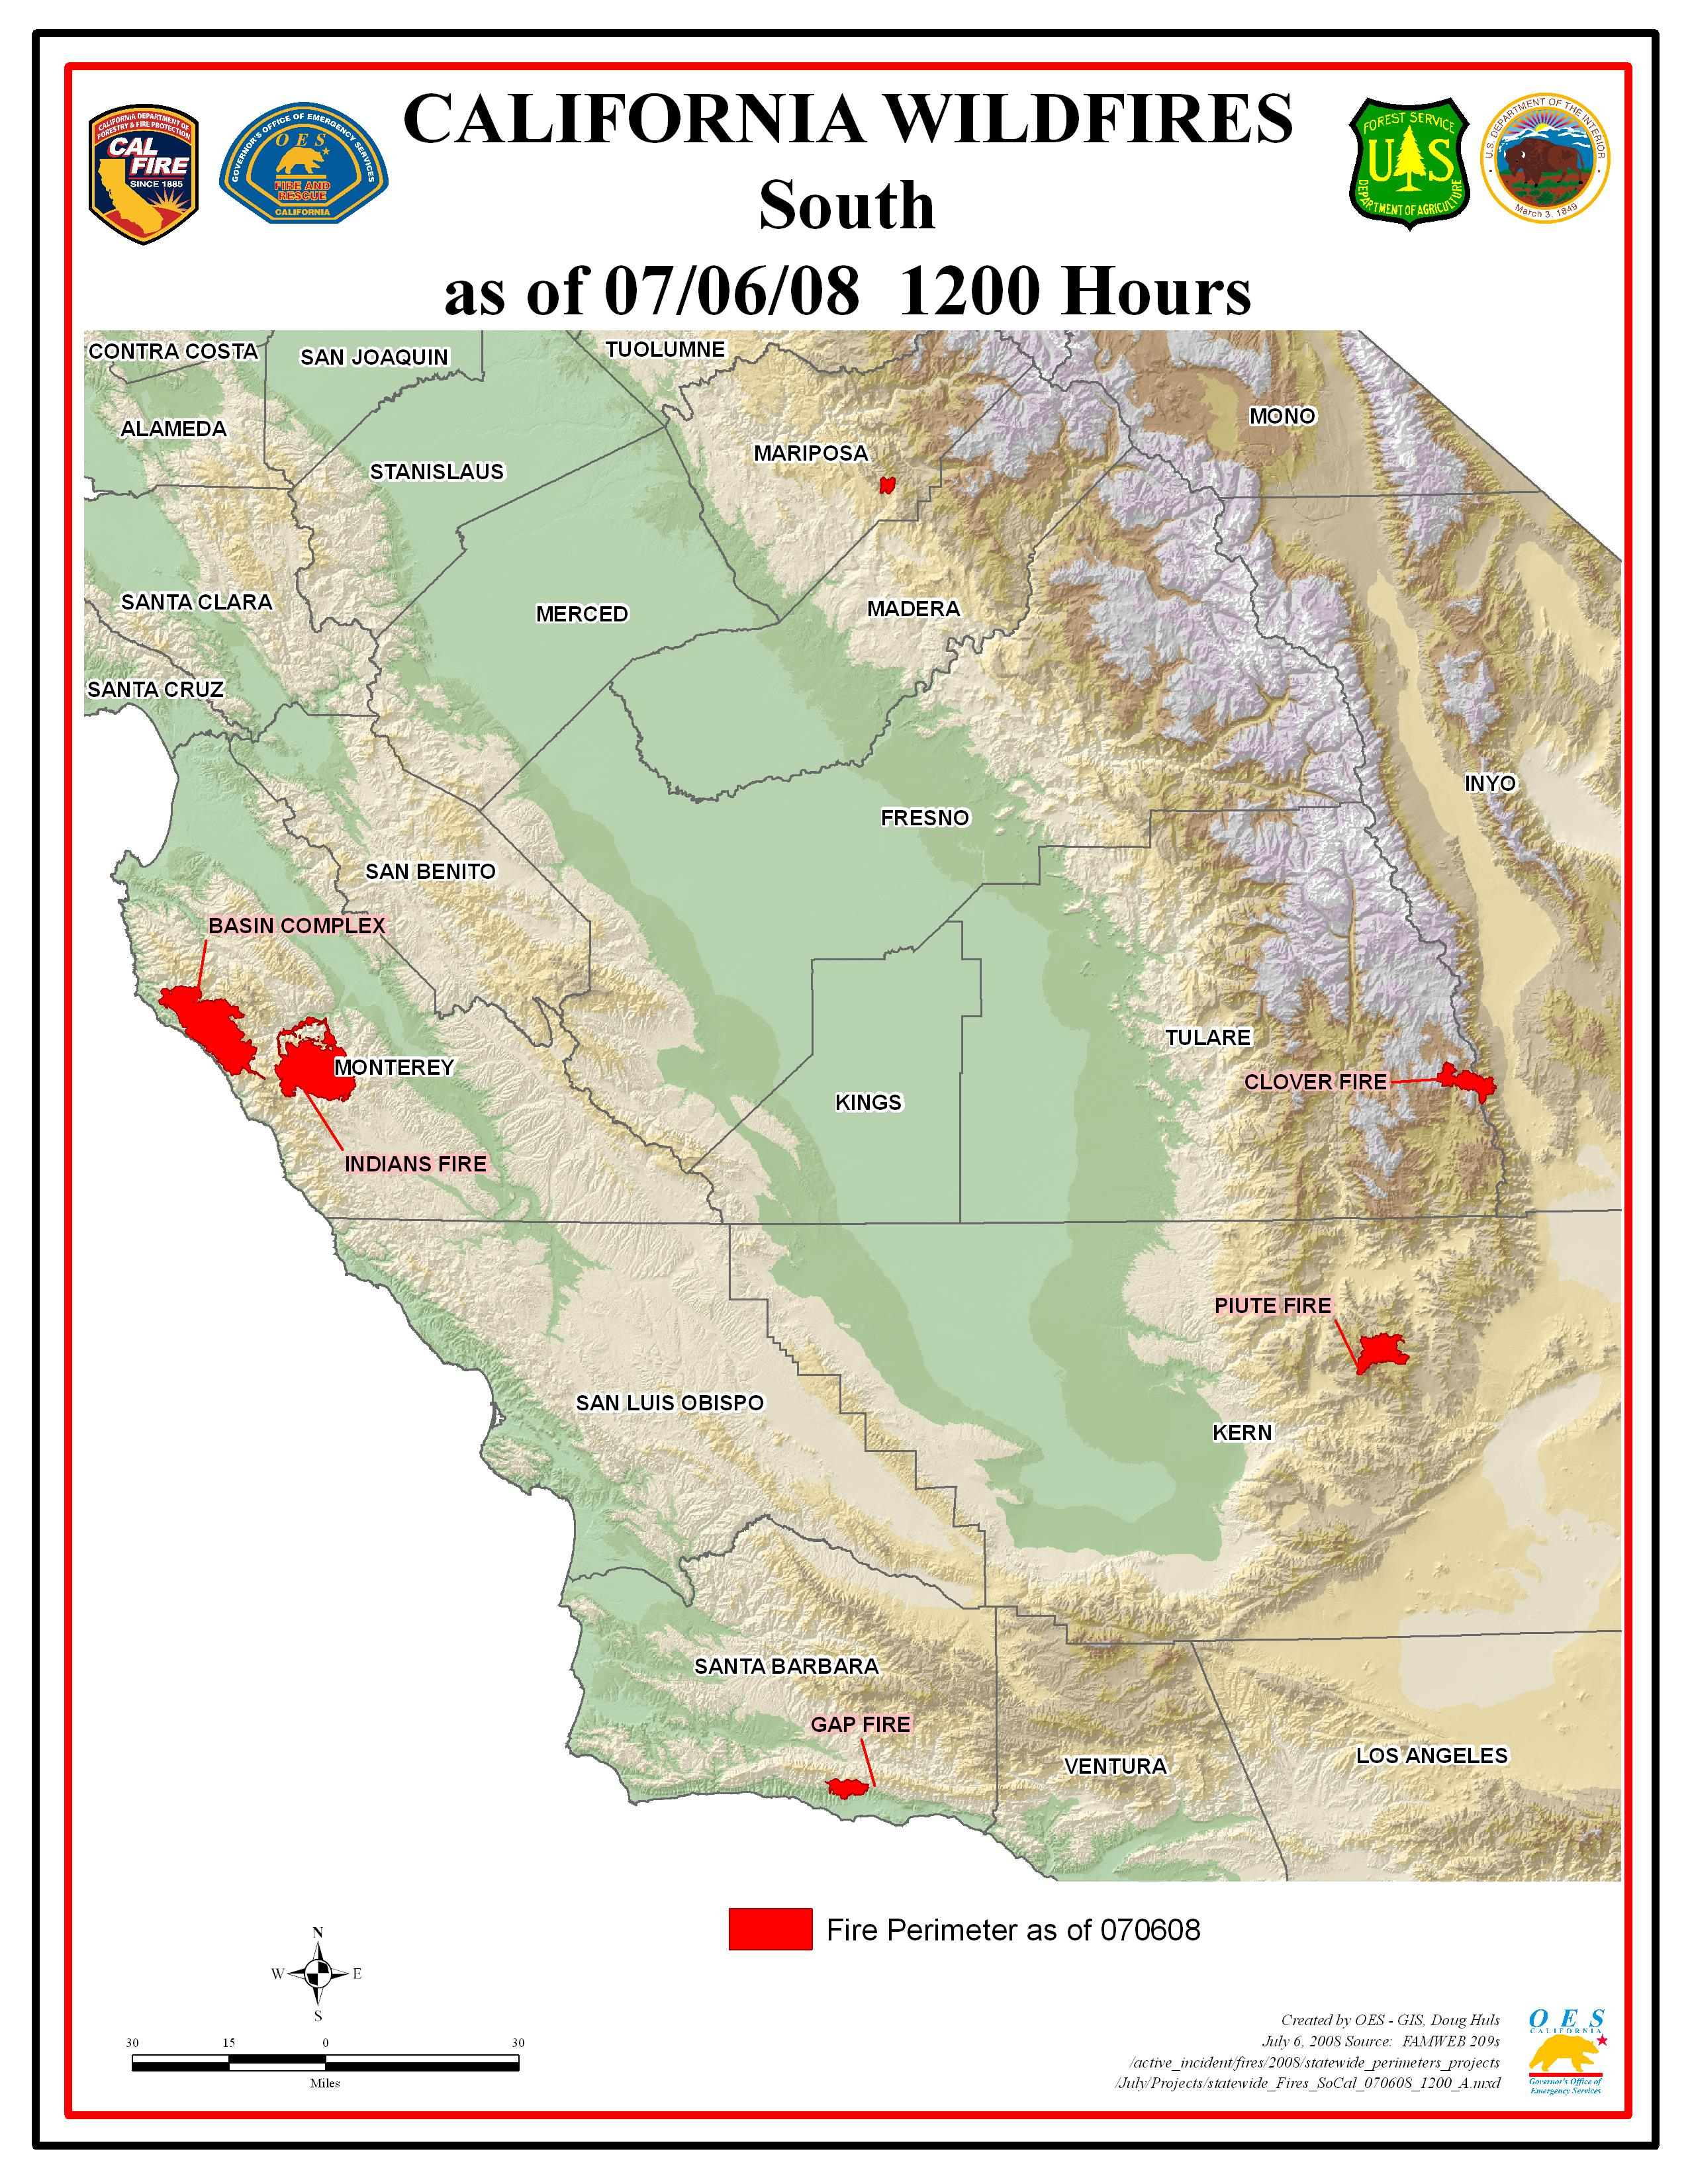 Wildfires Southern California Map - Klipy - Map Of Southern California Fires Today